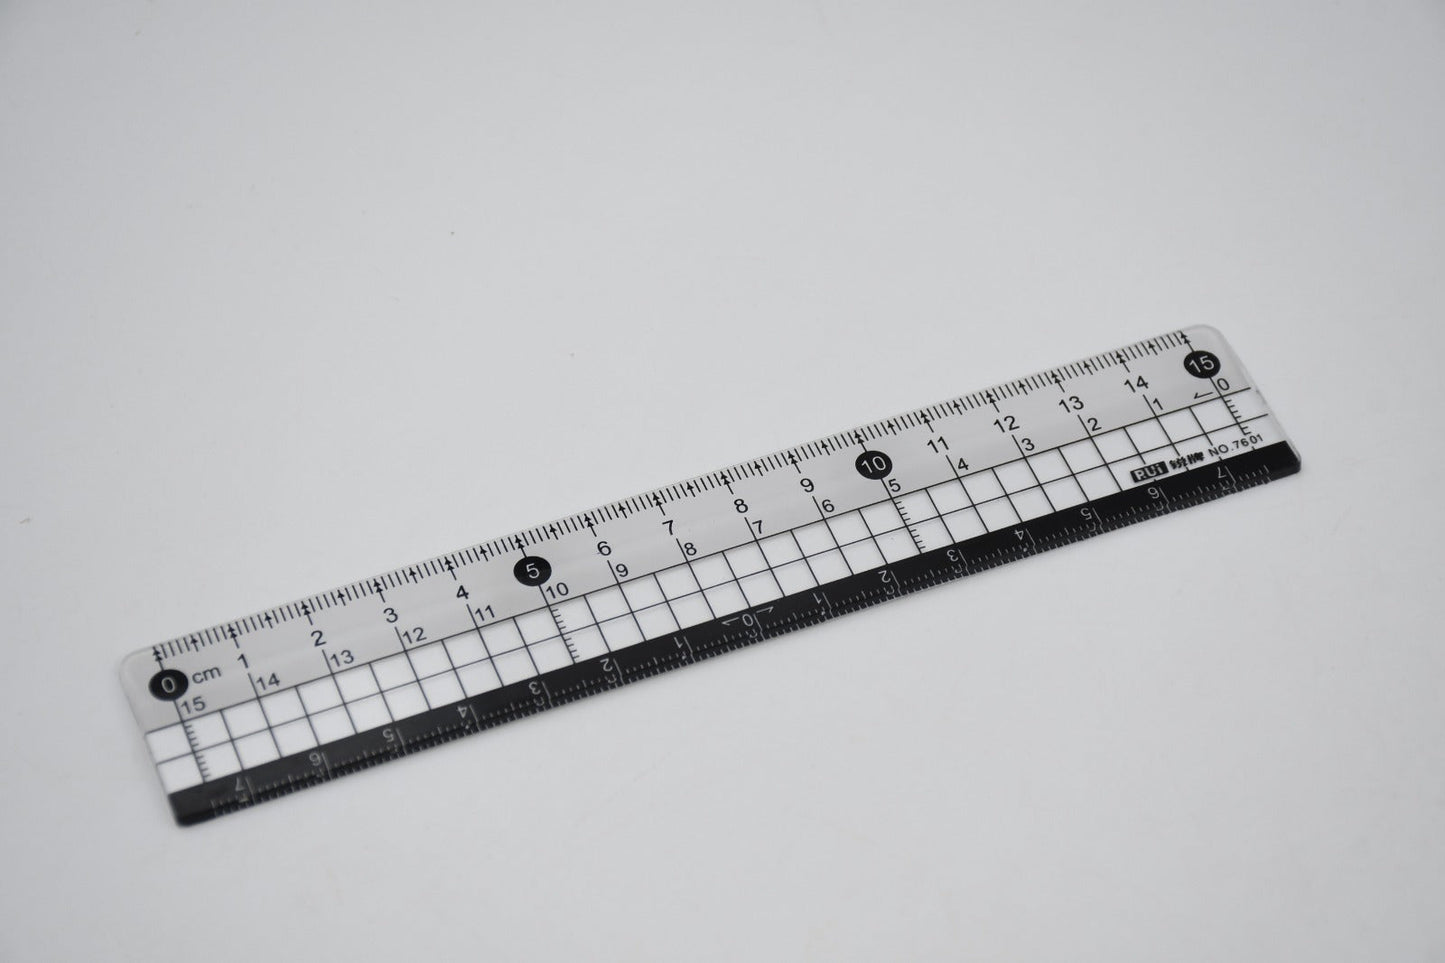 7921  TRANSPARENT RULER, PLASTIC RULERS, FOR SCHOOL CLASSROOM, HOME, OR OFFICE (15 Cm)